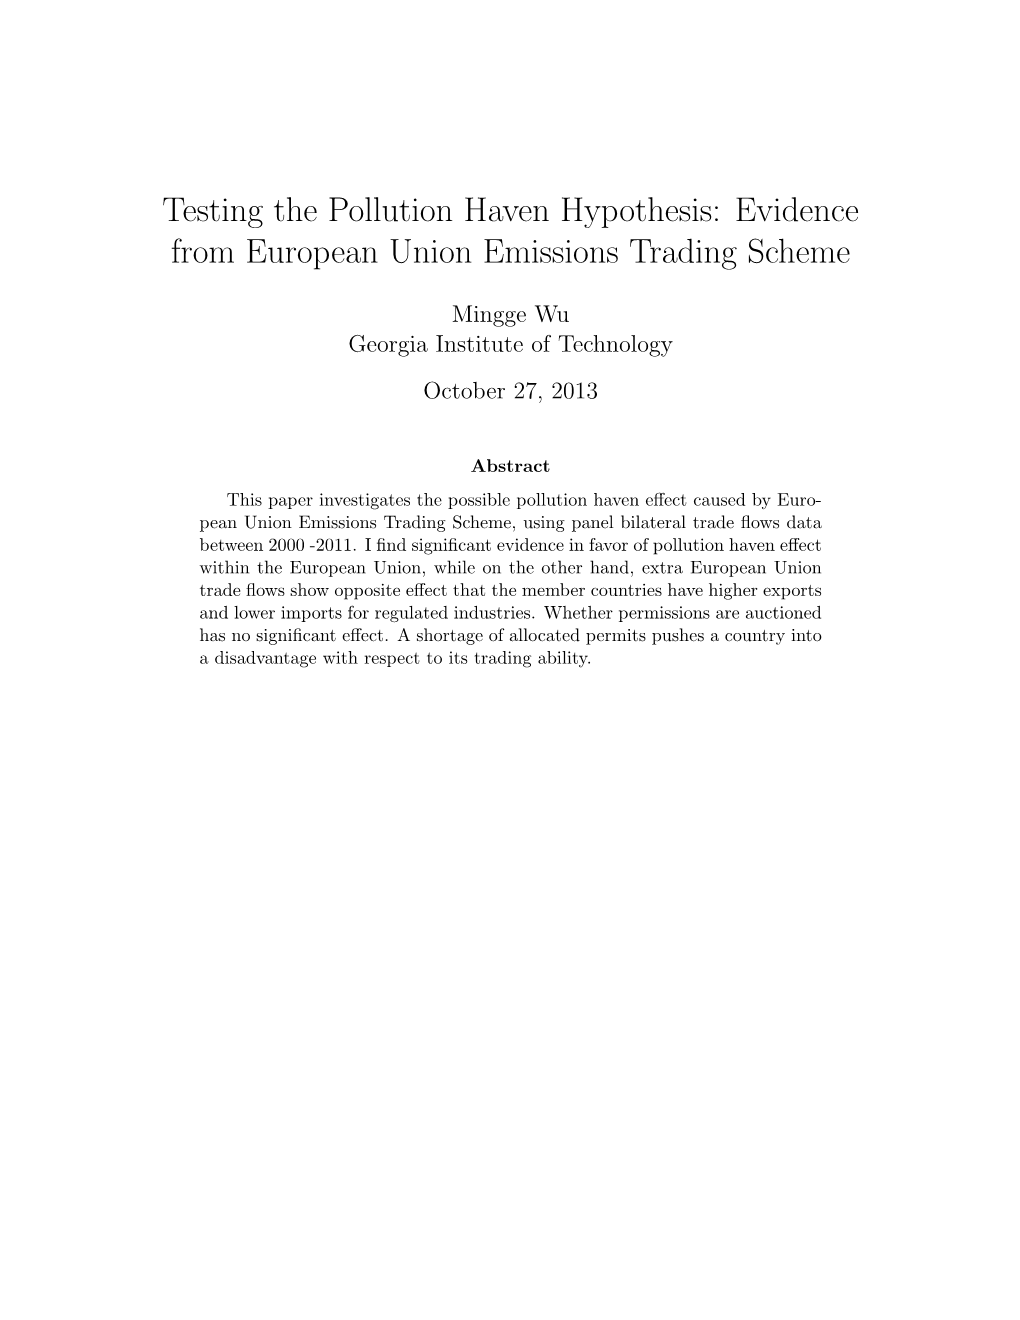 Testing the Pollution Haven Hypothesis: Evidence from European Union Emissions Trading Scheme